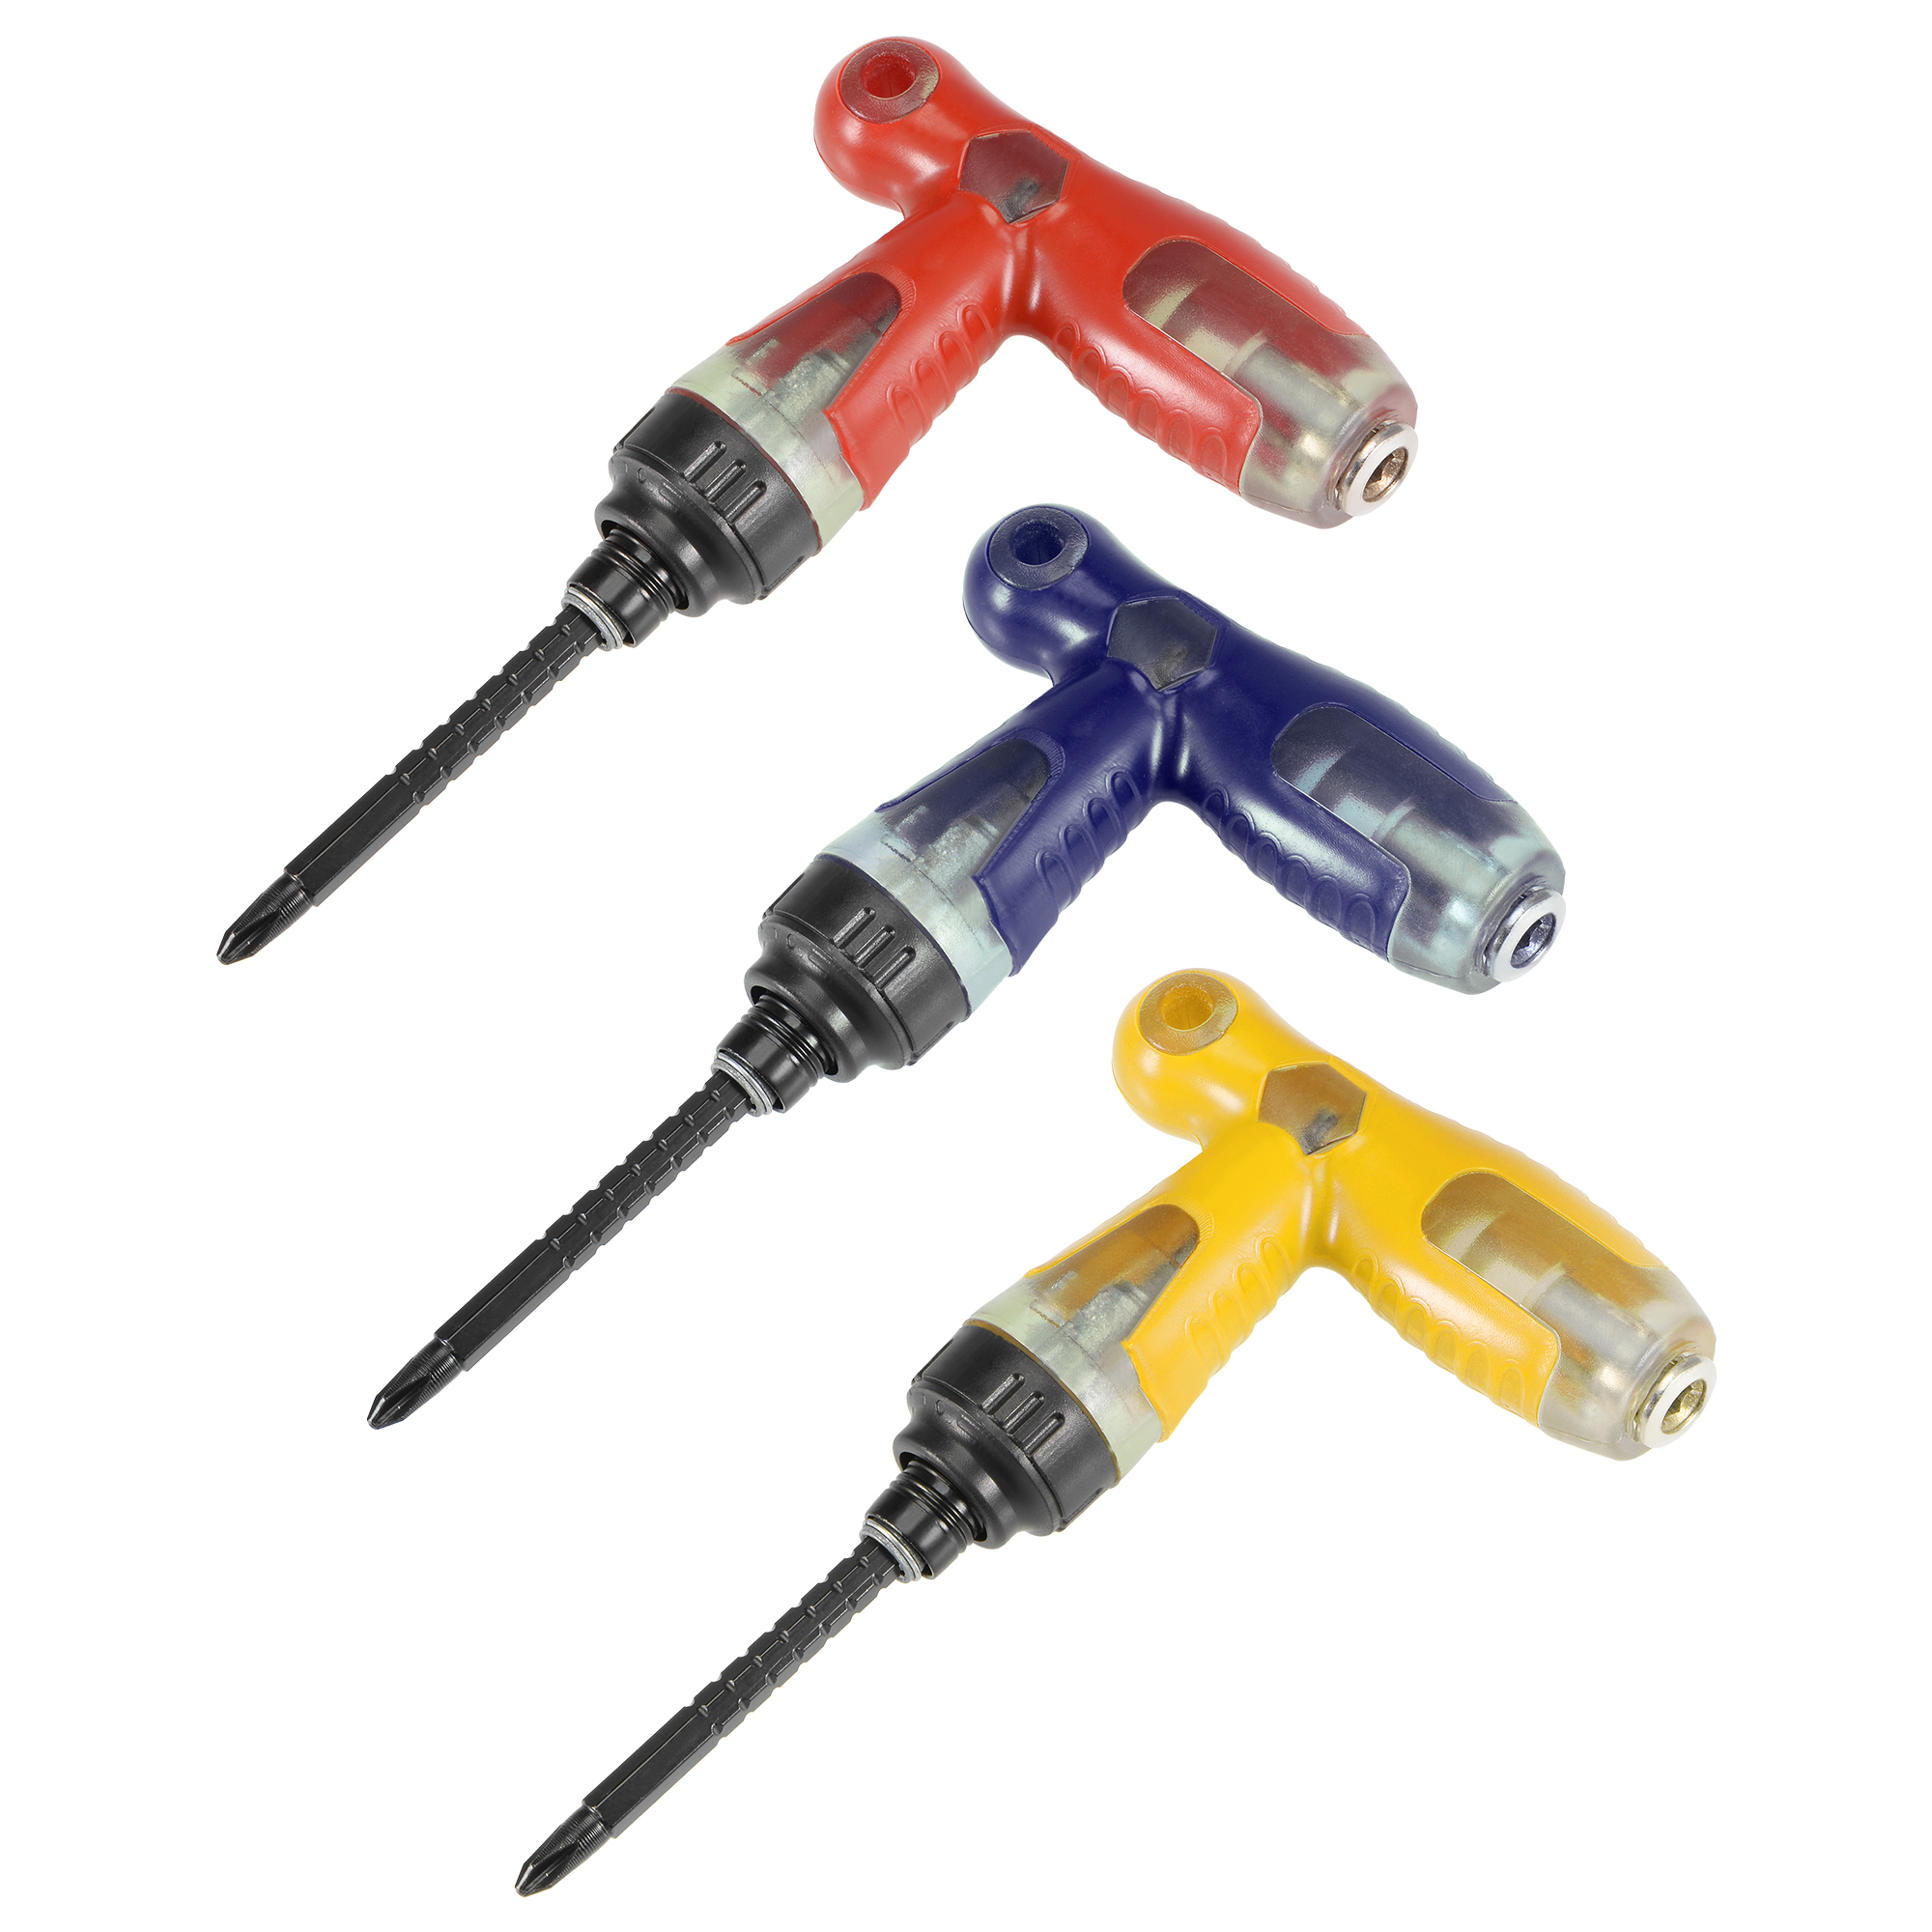 2 in 1 T Handle Screwdriver 6mm Slotted / PH2 Phillips 3pcs